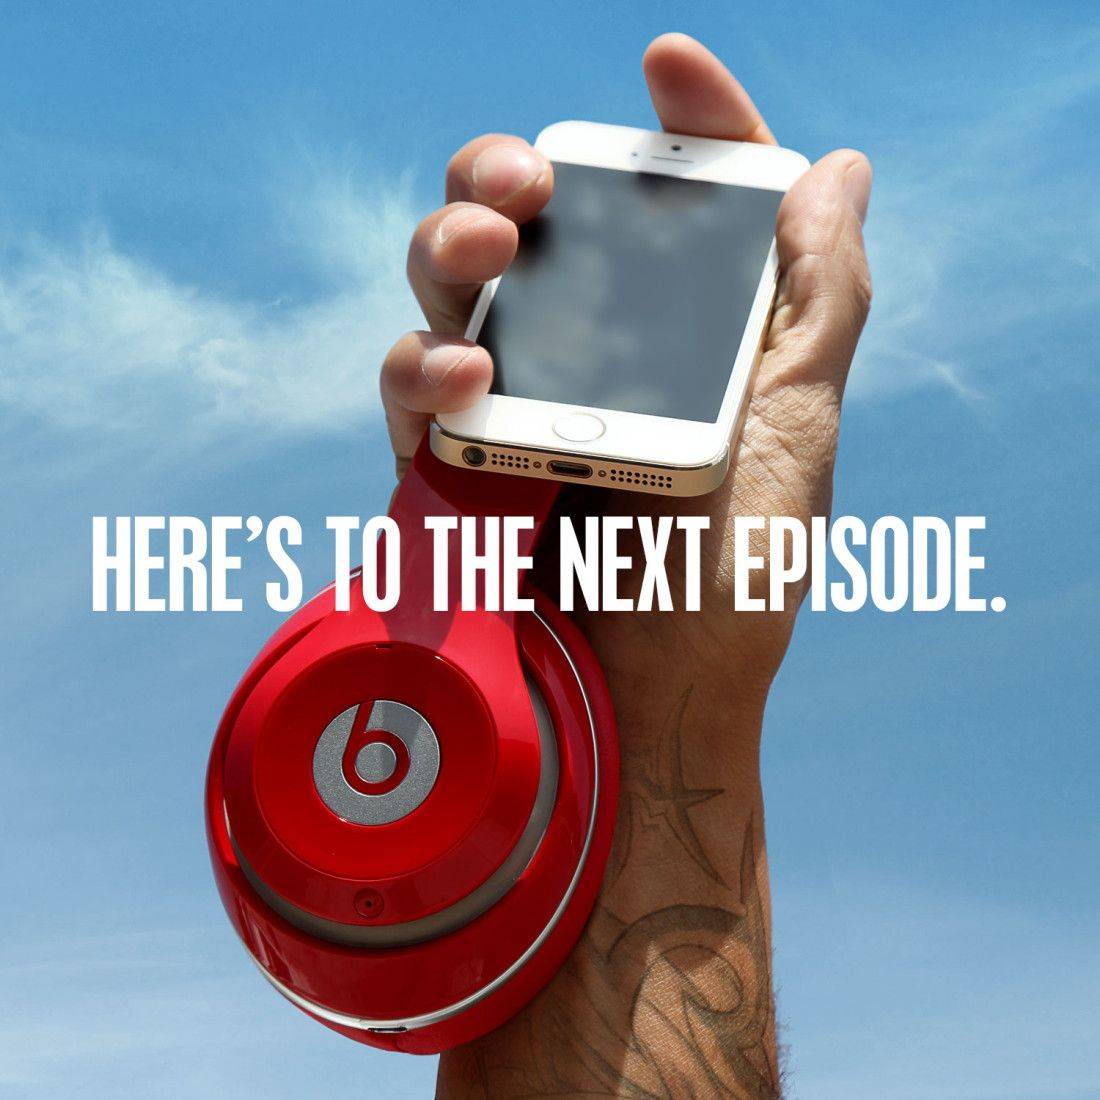 So long as the next episode doesn't include antitrust violations, that is. Photo: Beats Music